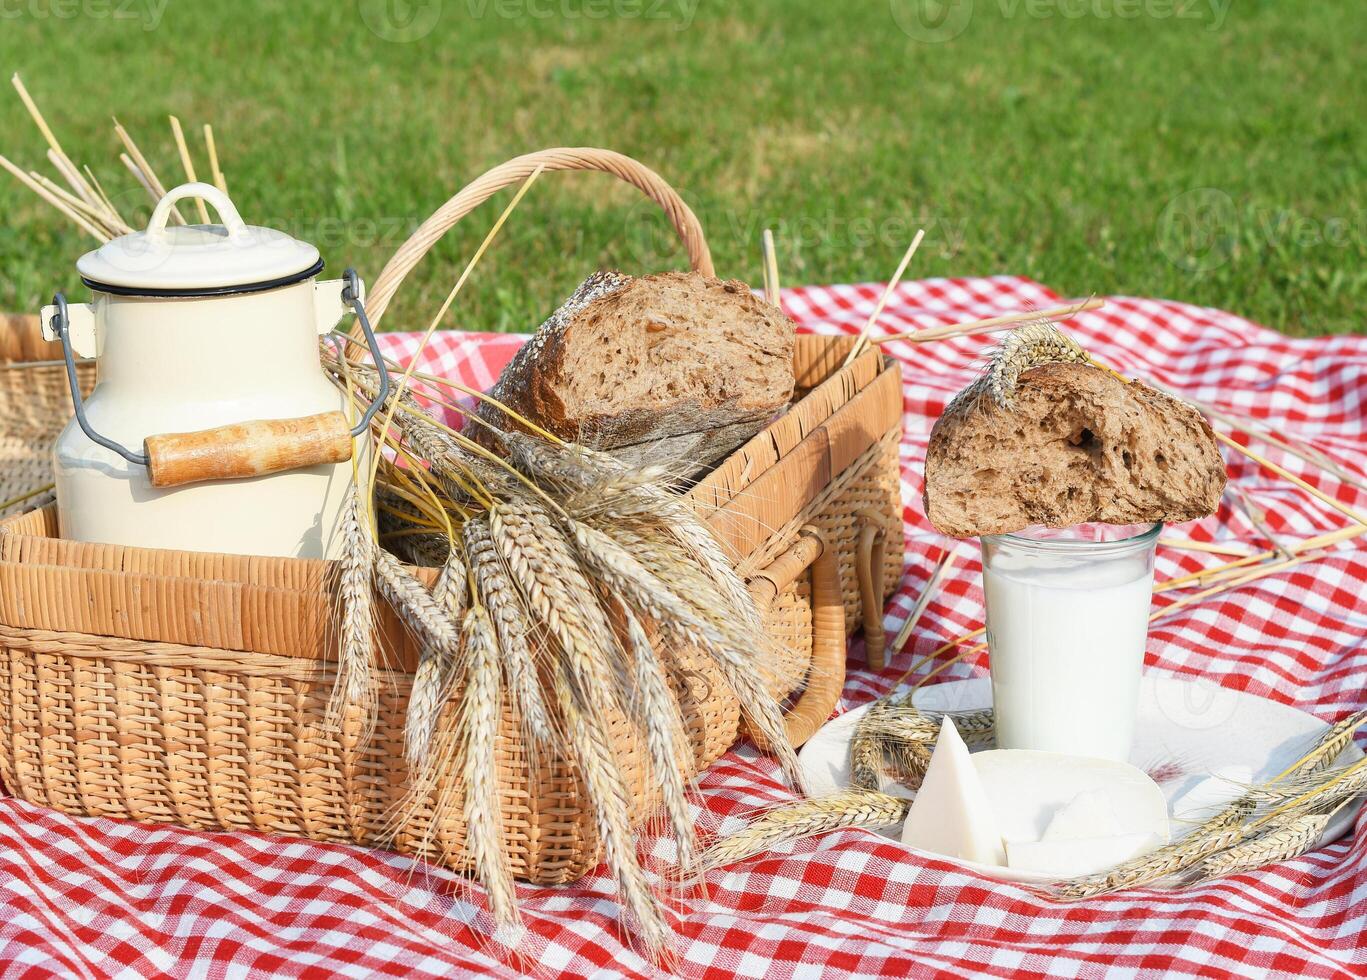 picnic with fresh bread and milk on a red checkered blanket on a green lawn, carefree summer holiday outdoors photo